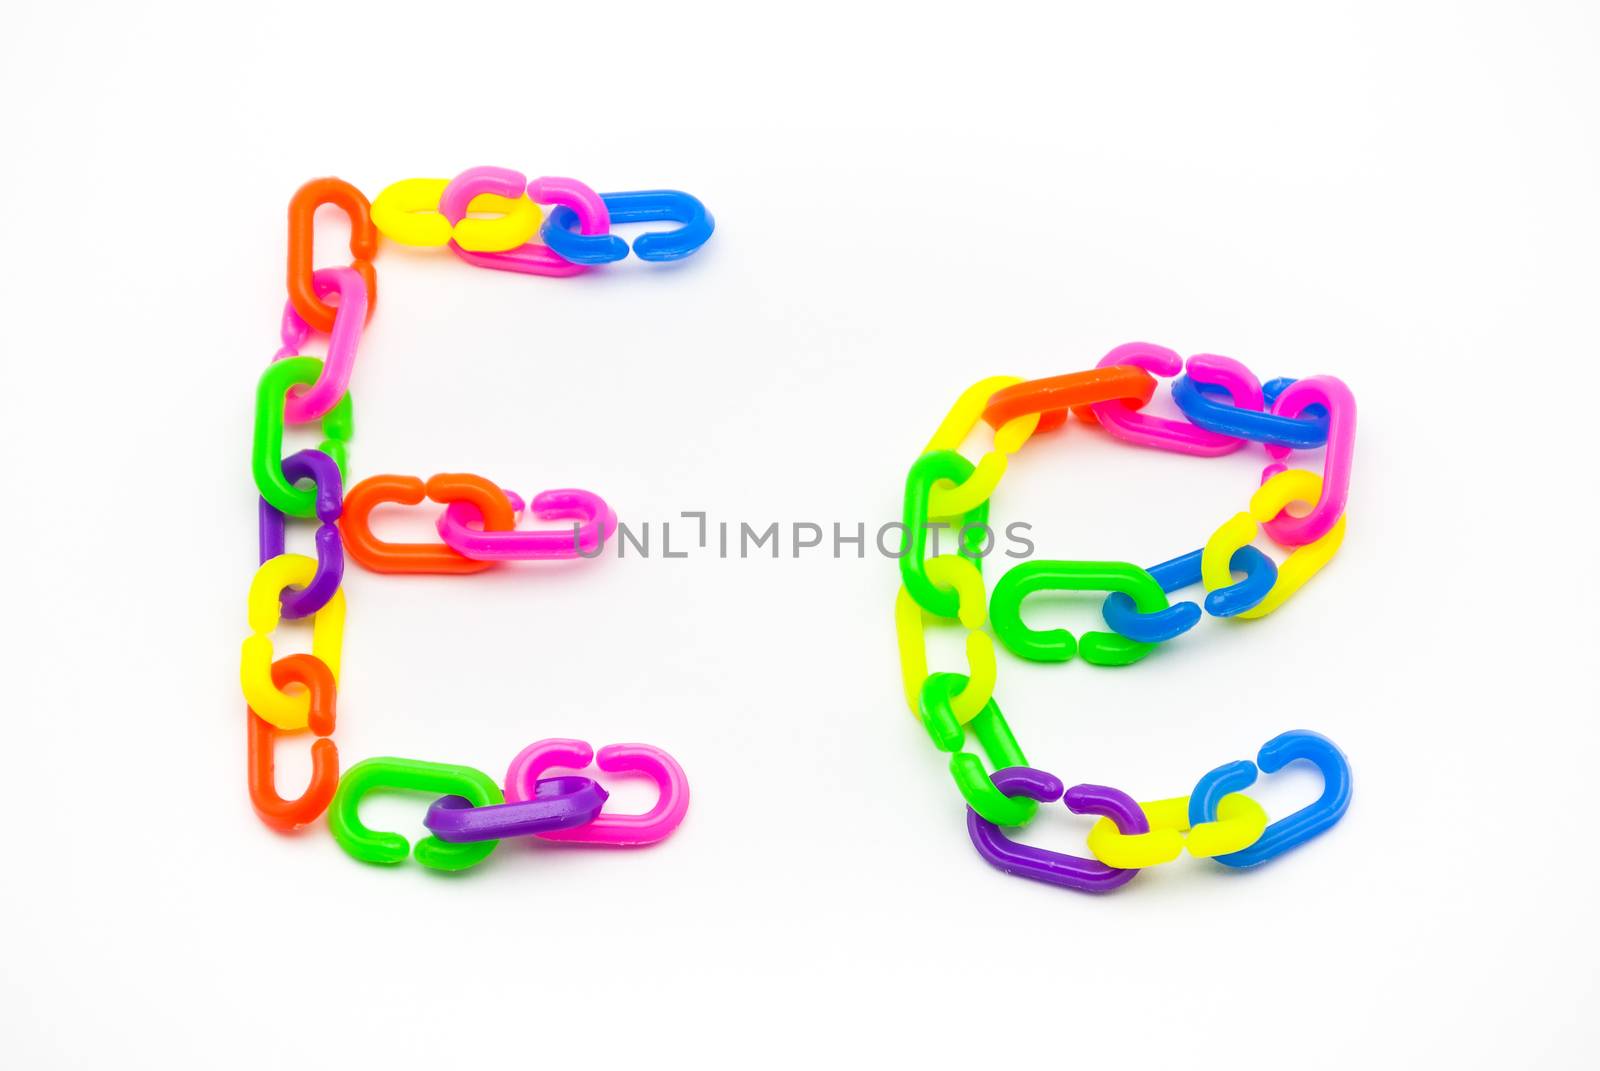 E and e Alphabet, Created by Colorful Plastic Chain.